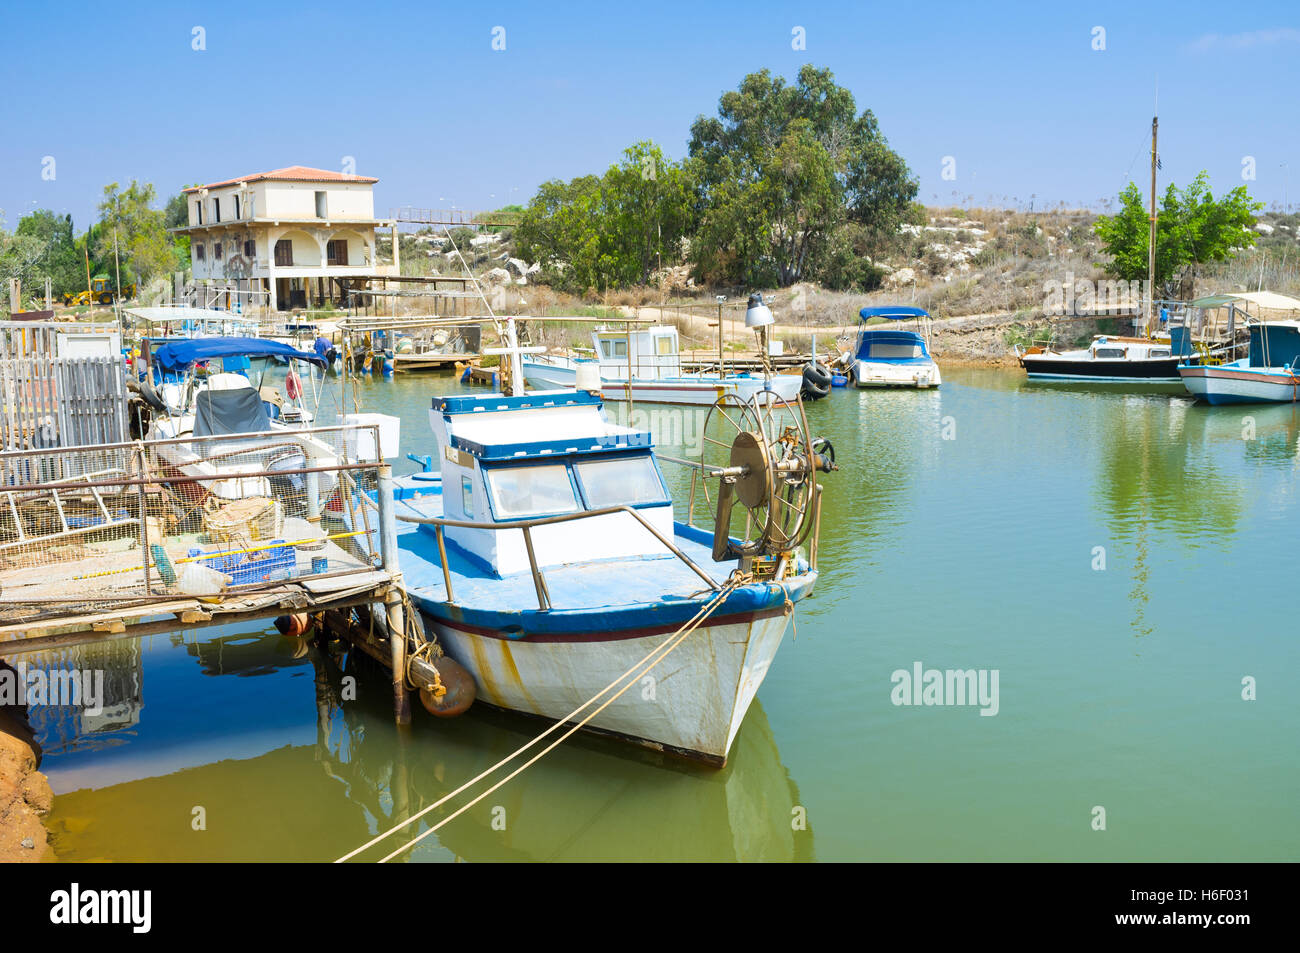 Walking along the river it's easy to find many old boats, moored next to the banks, Liopetri, Cyprus. Stock Photo